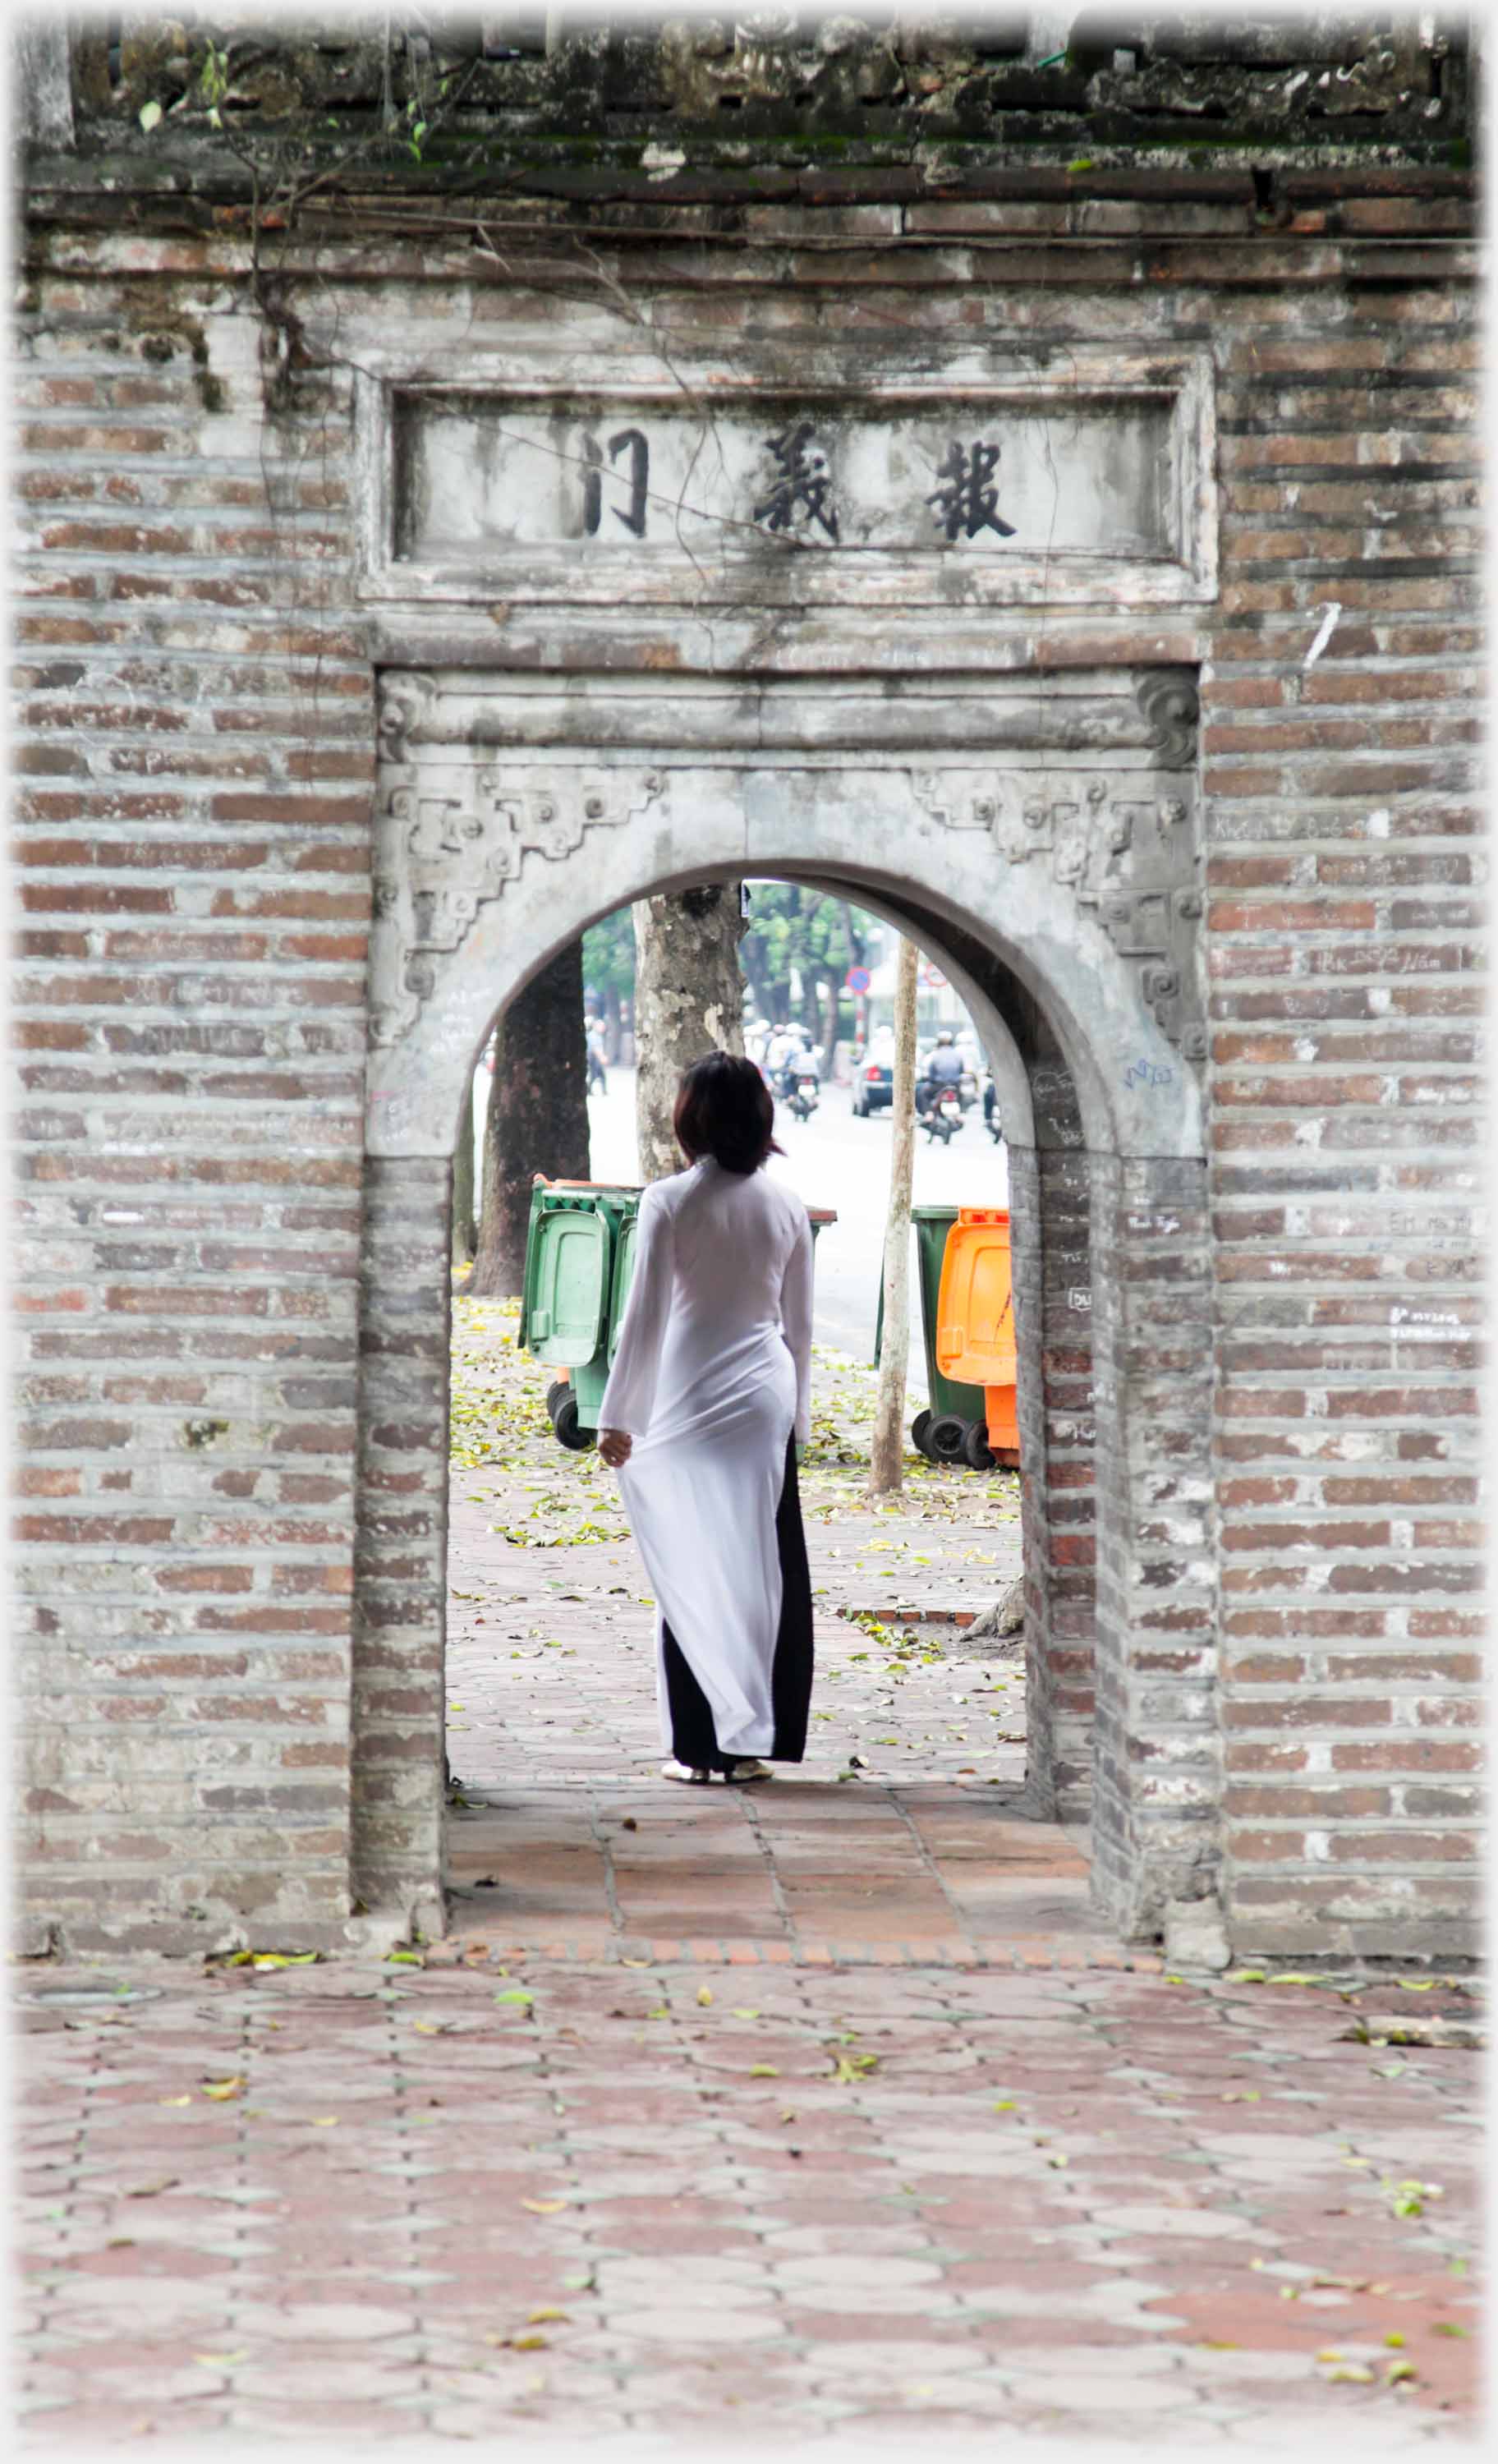 Woman in long white dress framed in an archway.